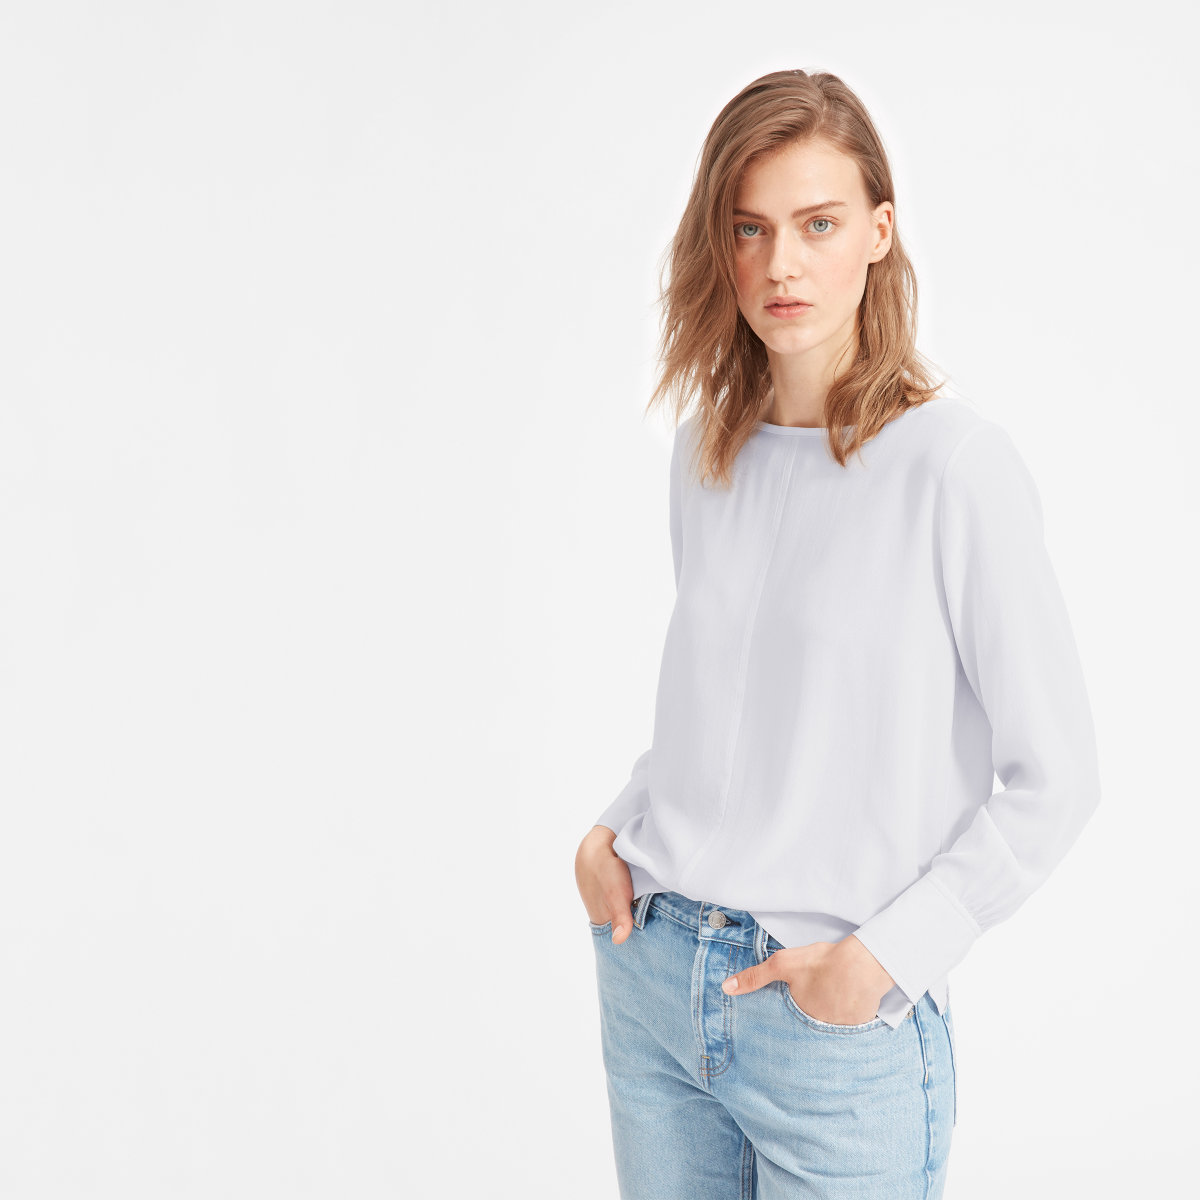 The Clean Silk Boatneck Blouse